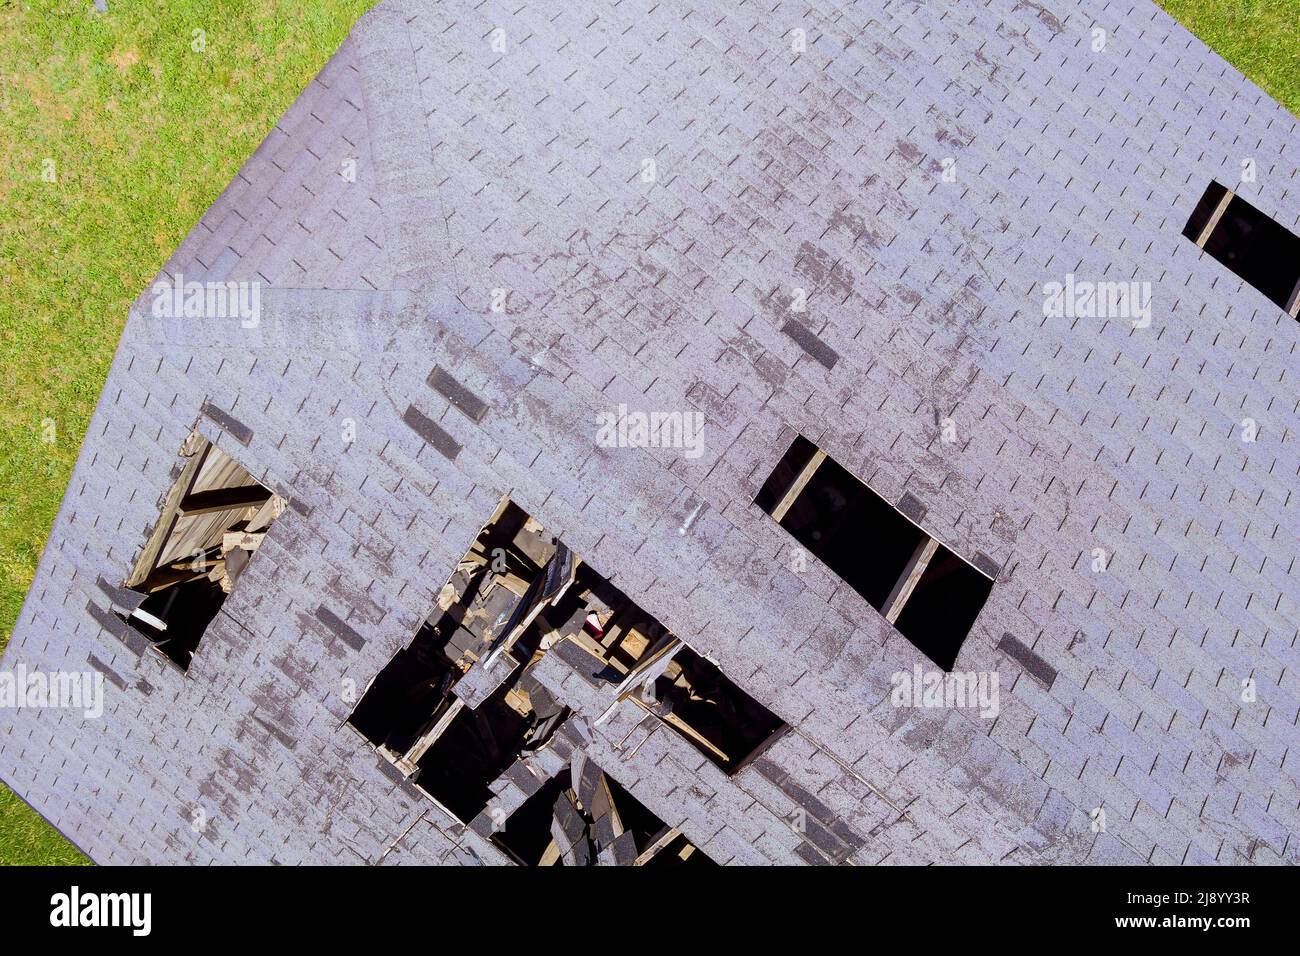 Damaged tiled roofing with broken tiles and a hole on the roof Stock Photo